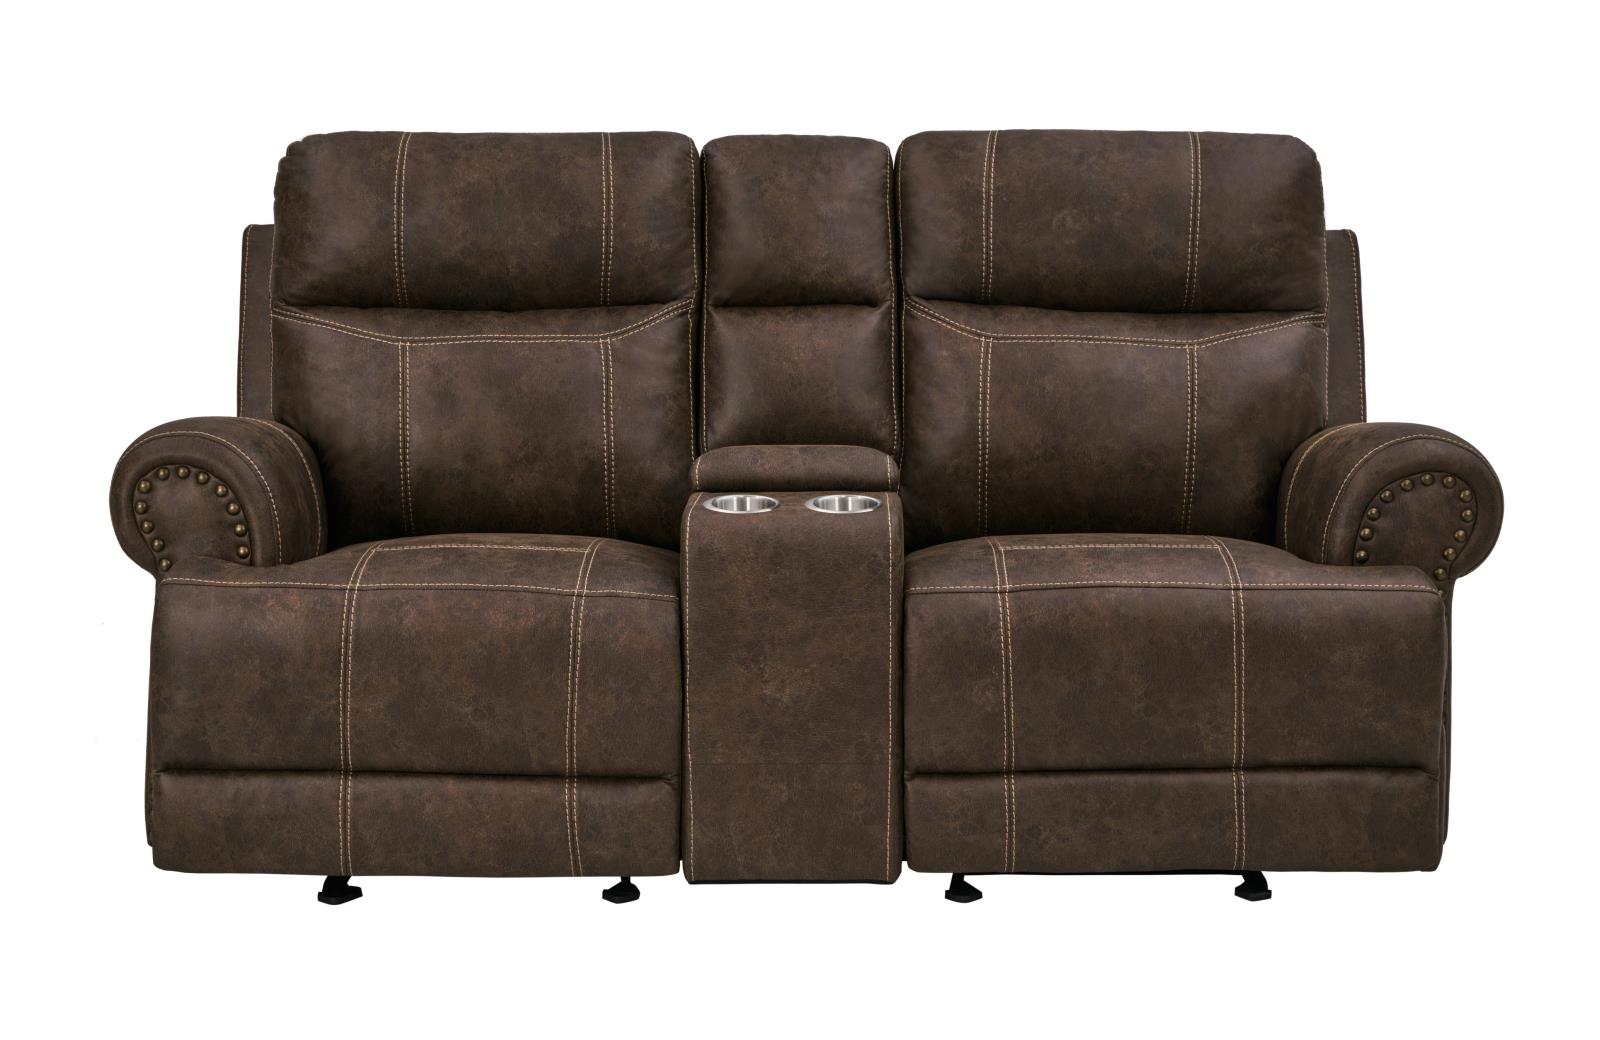 Brixton Glider Loveseat with Cup Holders Buckskin Brown - What A Room